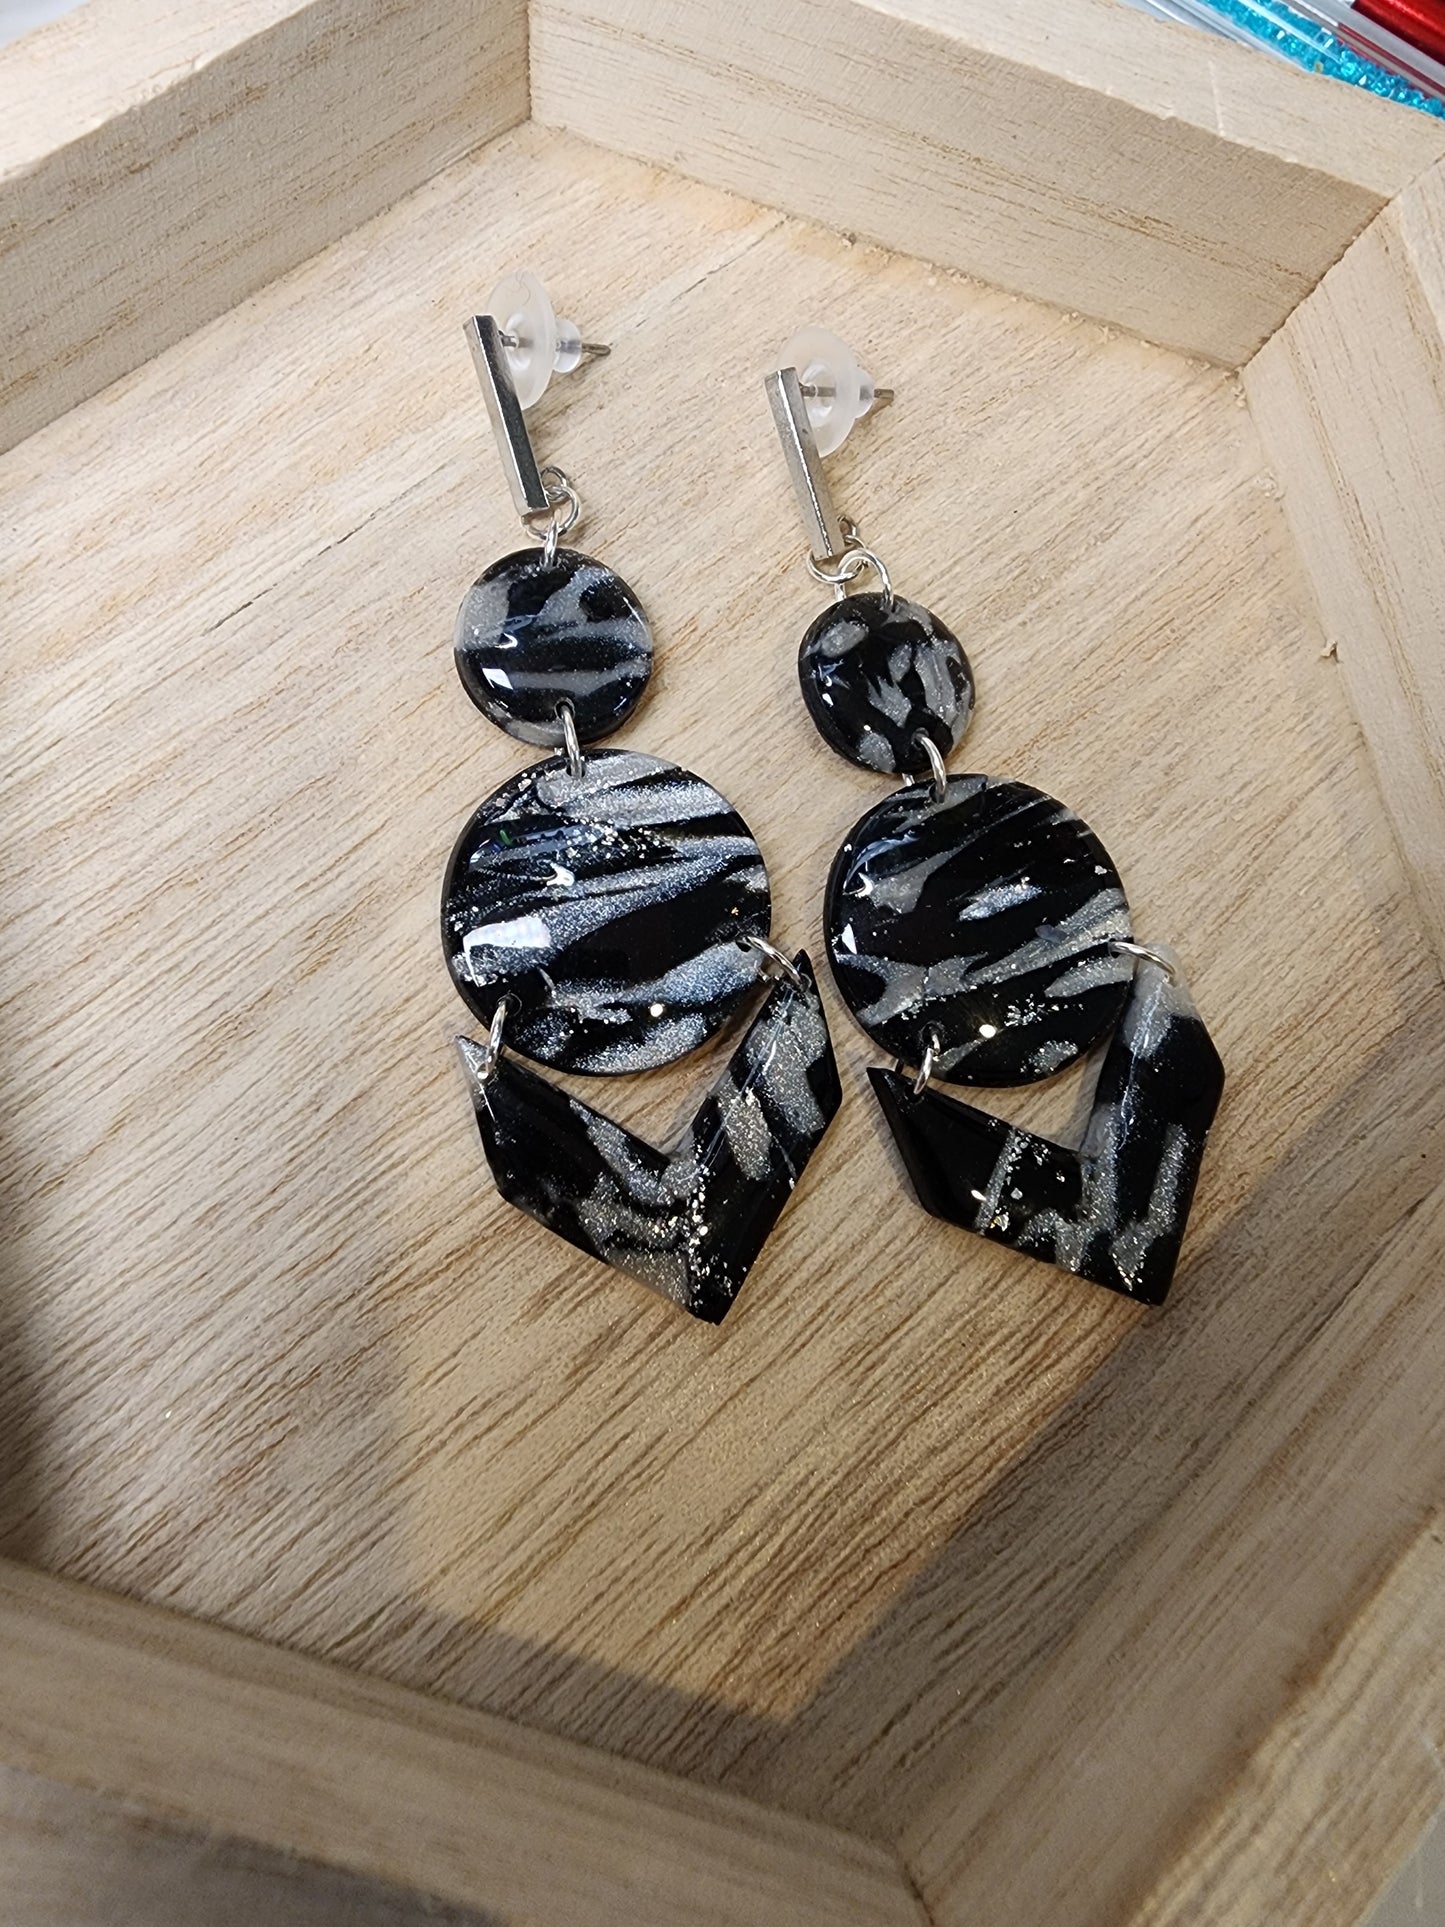 Marbled Shimmery Black & White Clay Earrings